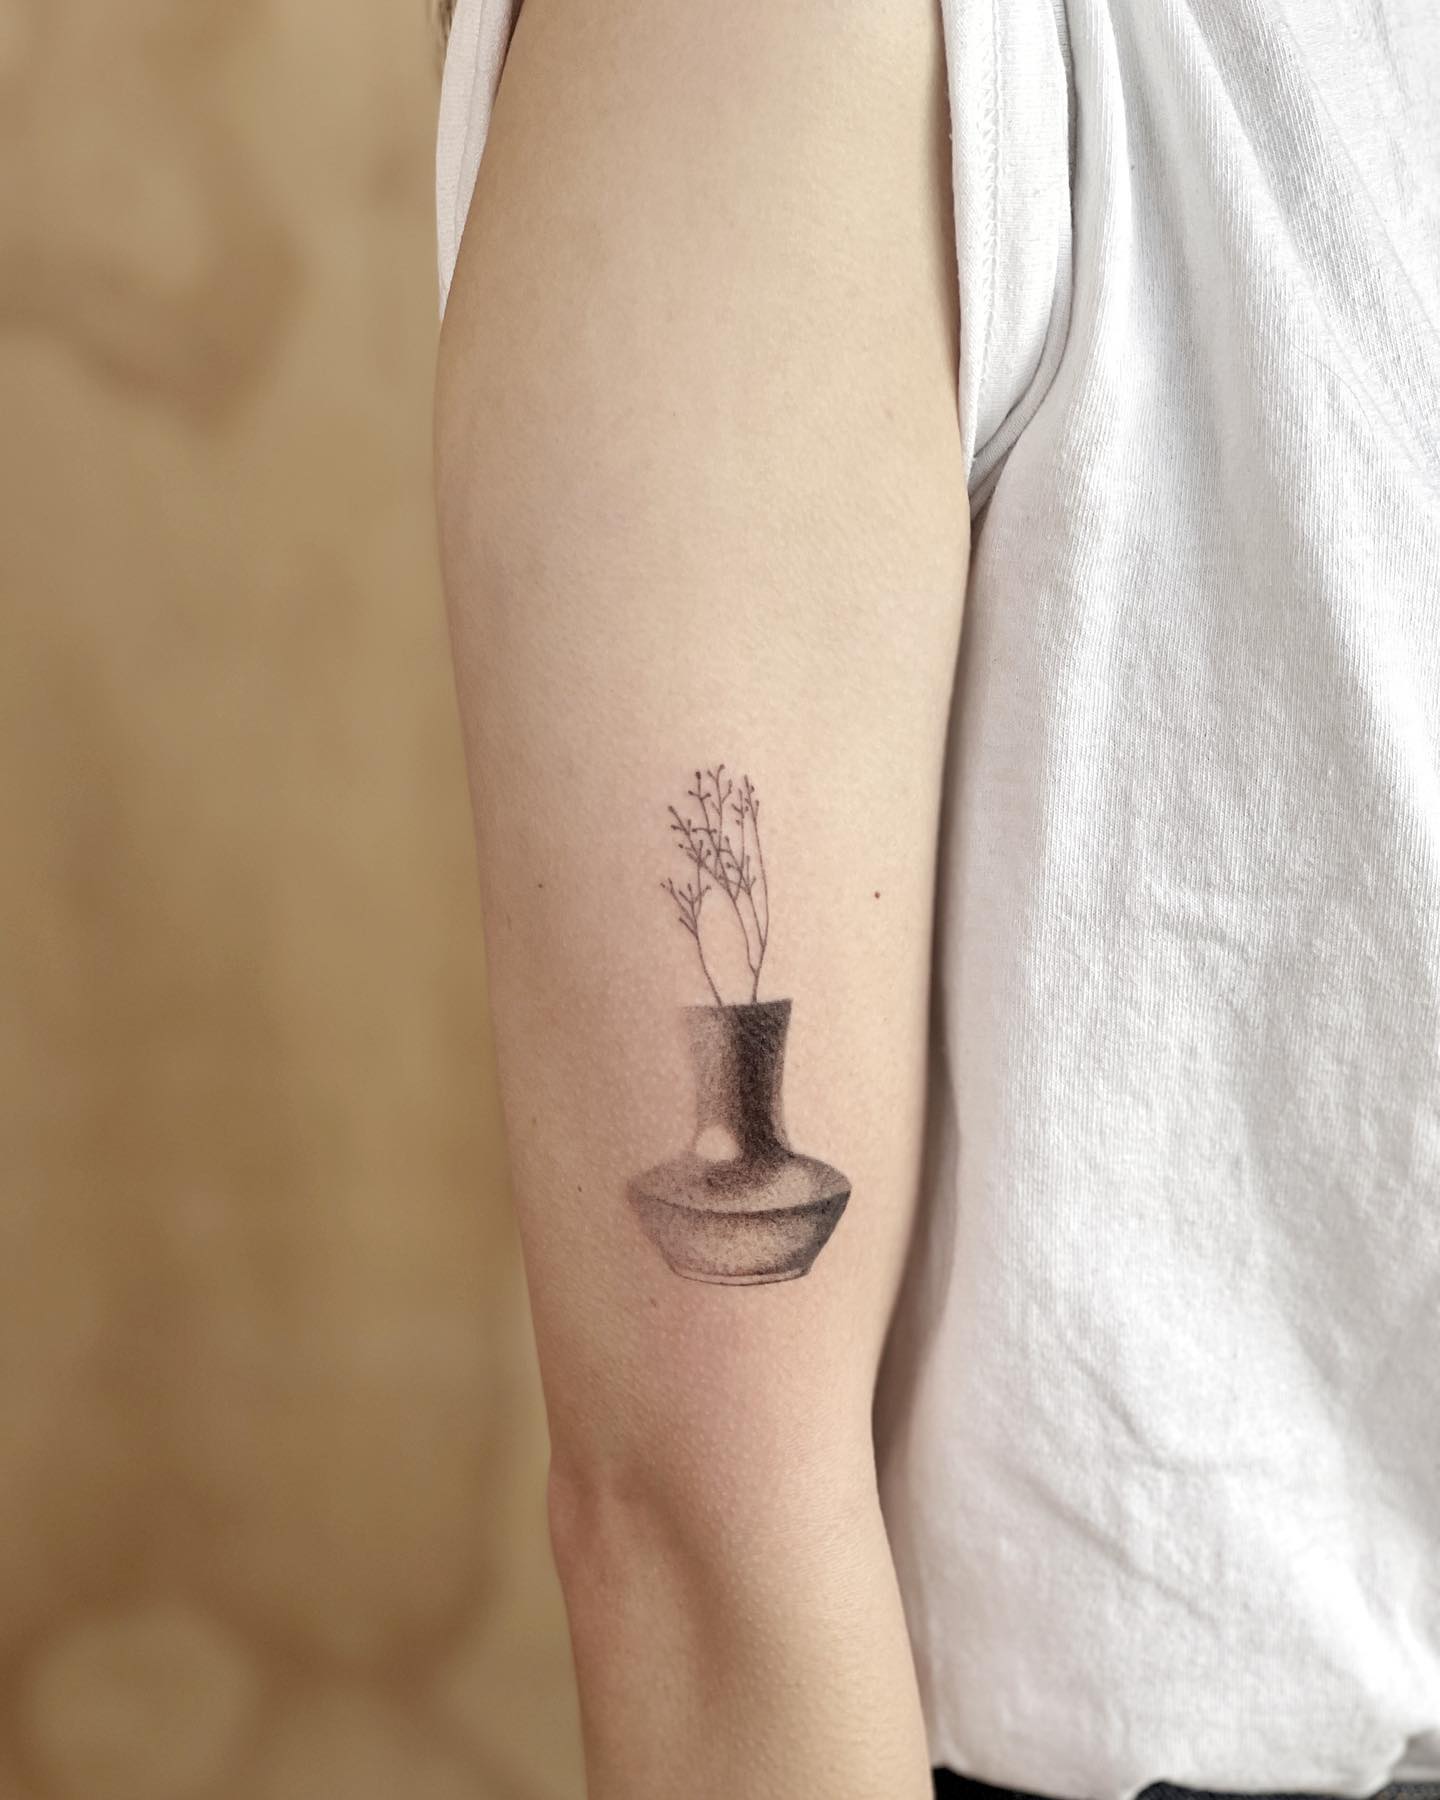 A small but detailed vase dotwork tattoo design is enough to enjoy your tattoo. Why don't you give it a shot?